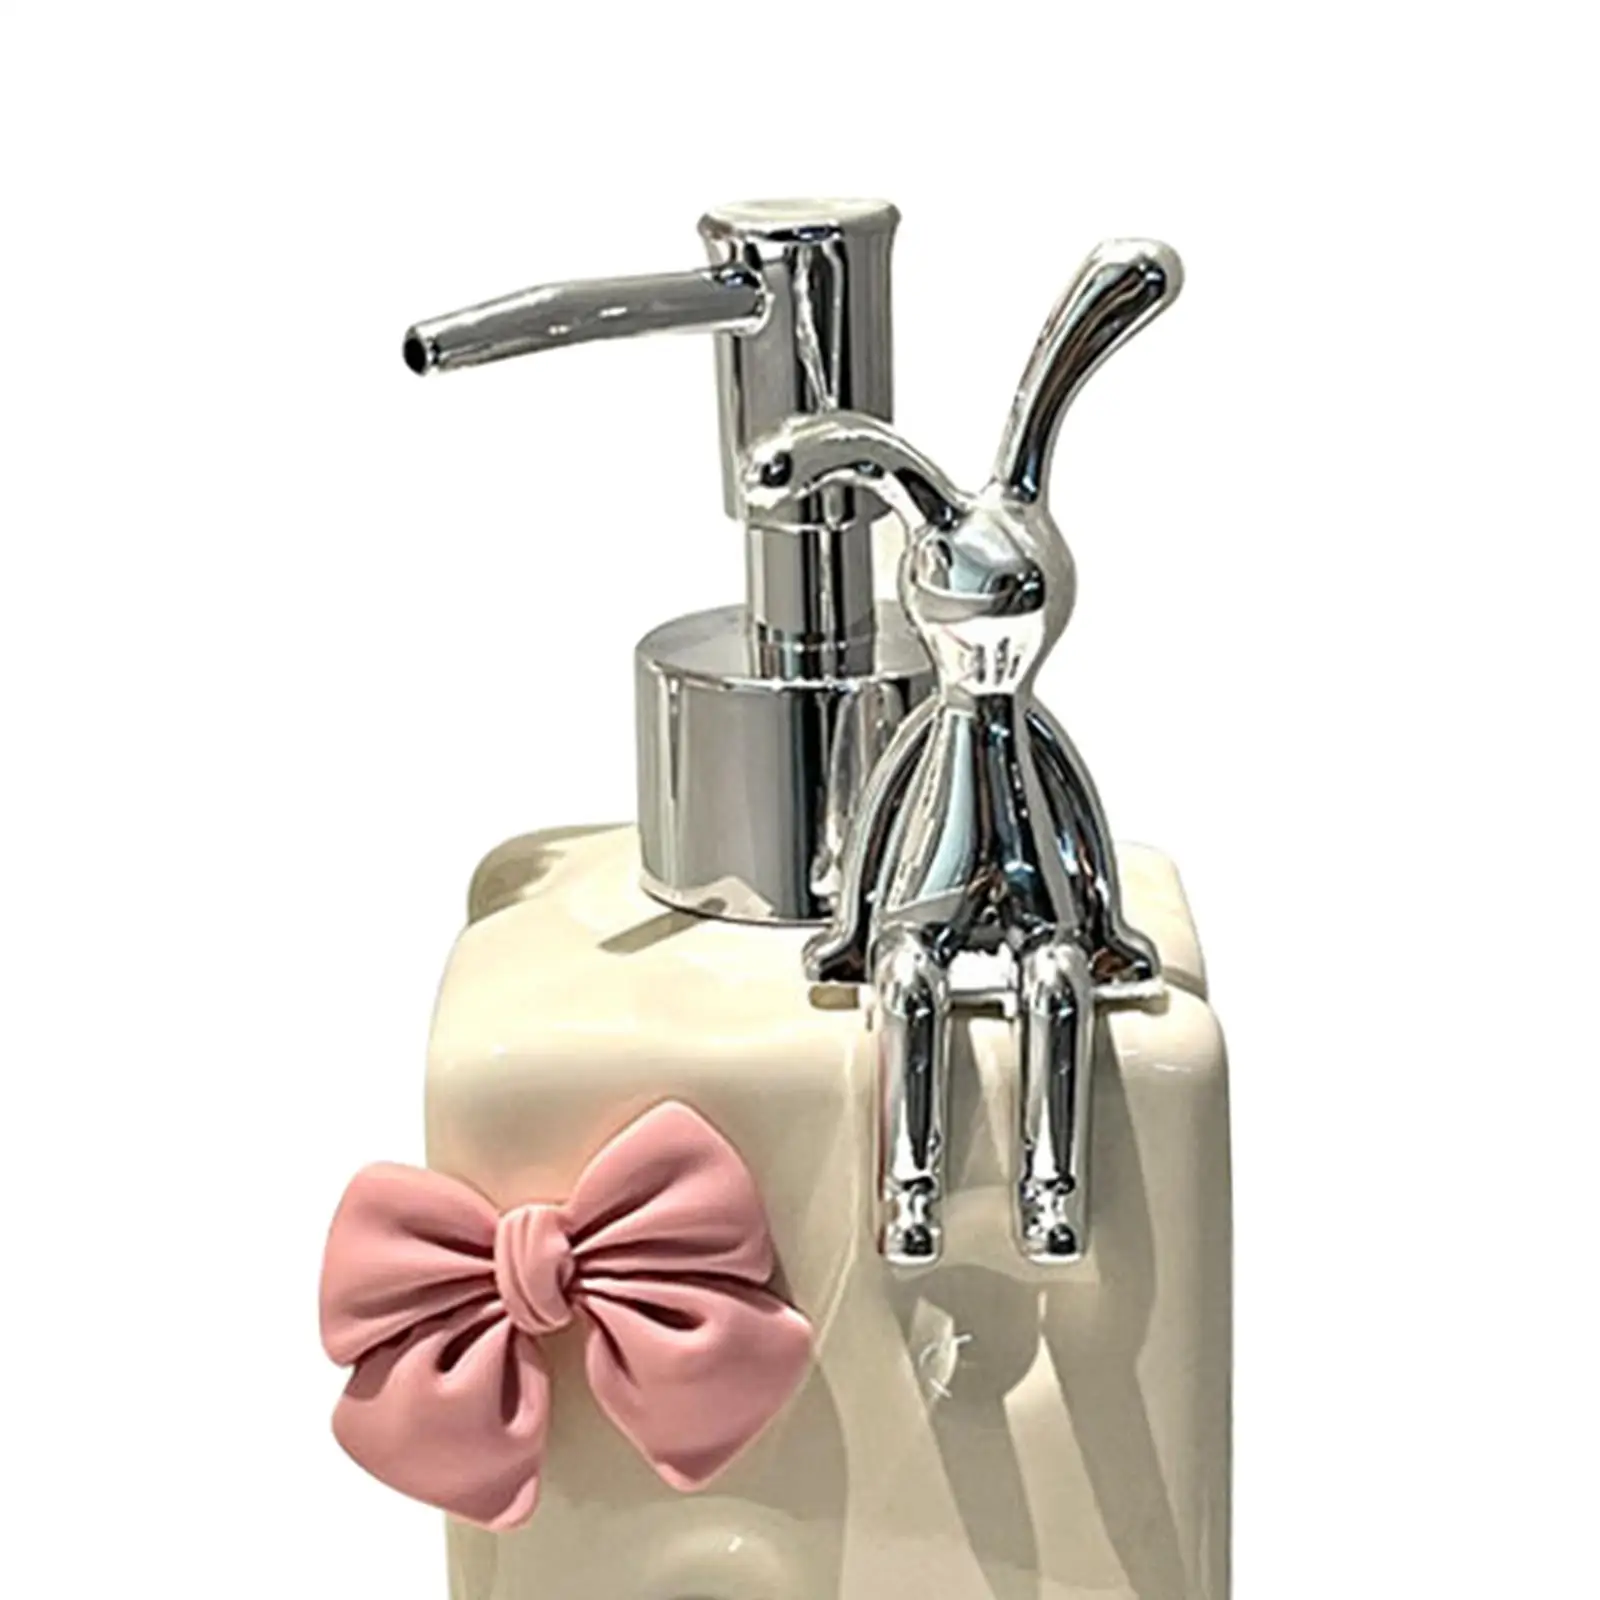 Manual Soap Dispenser Nordic 400ml Sturdy Refillable Empty Pump Lotion Bottle for Hotel Washroom Toilet Countertop Laundry Room